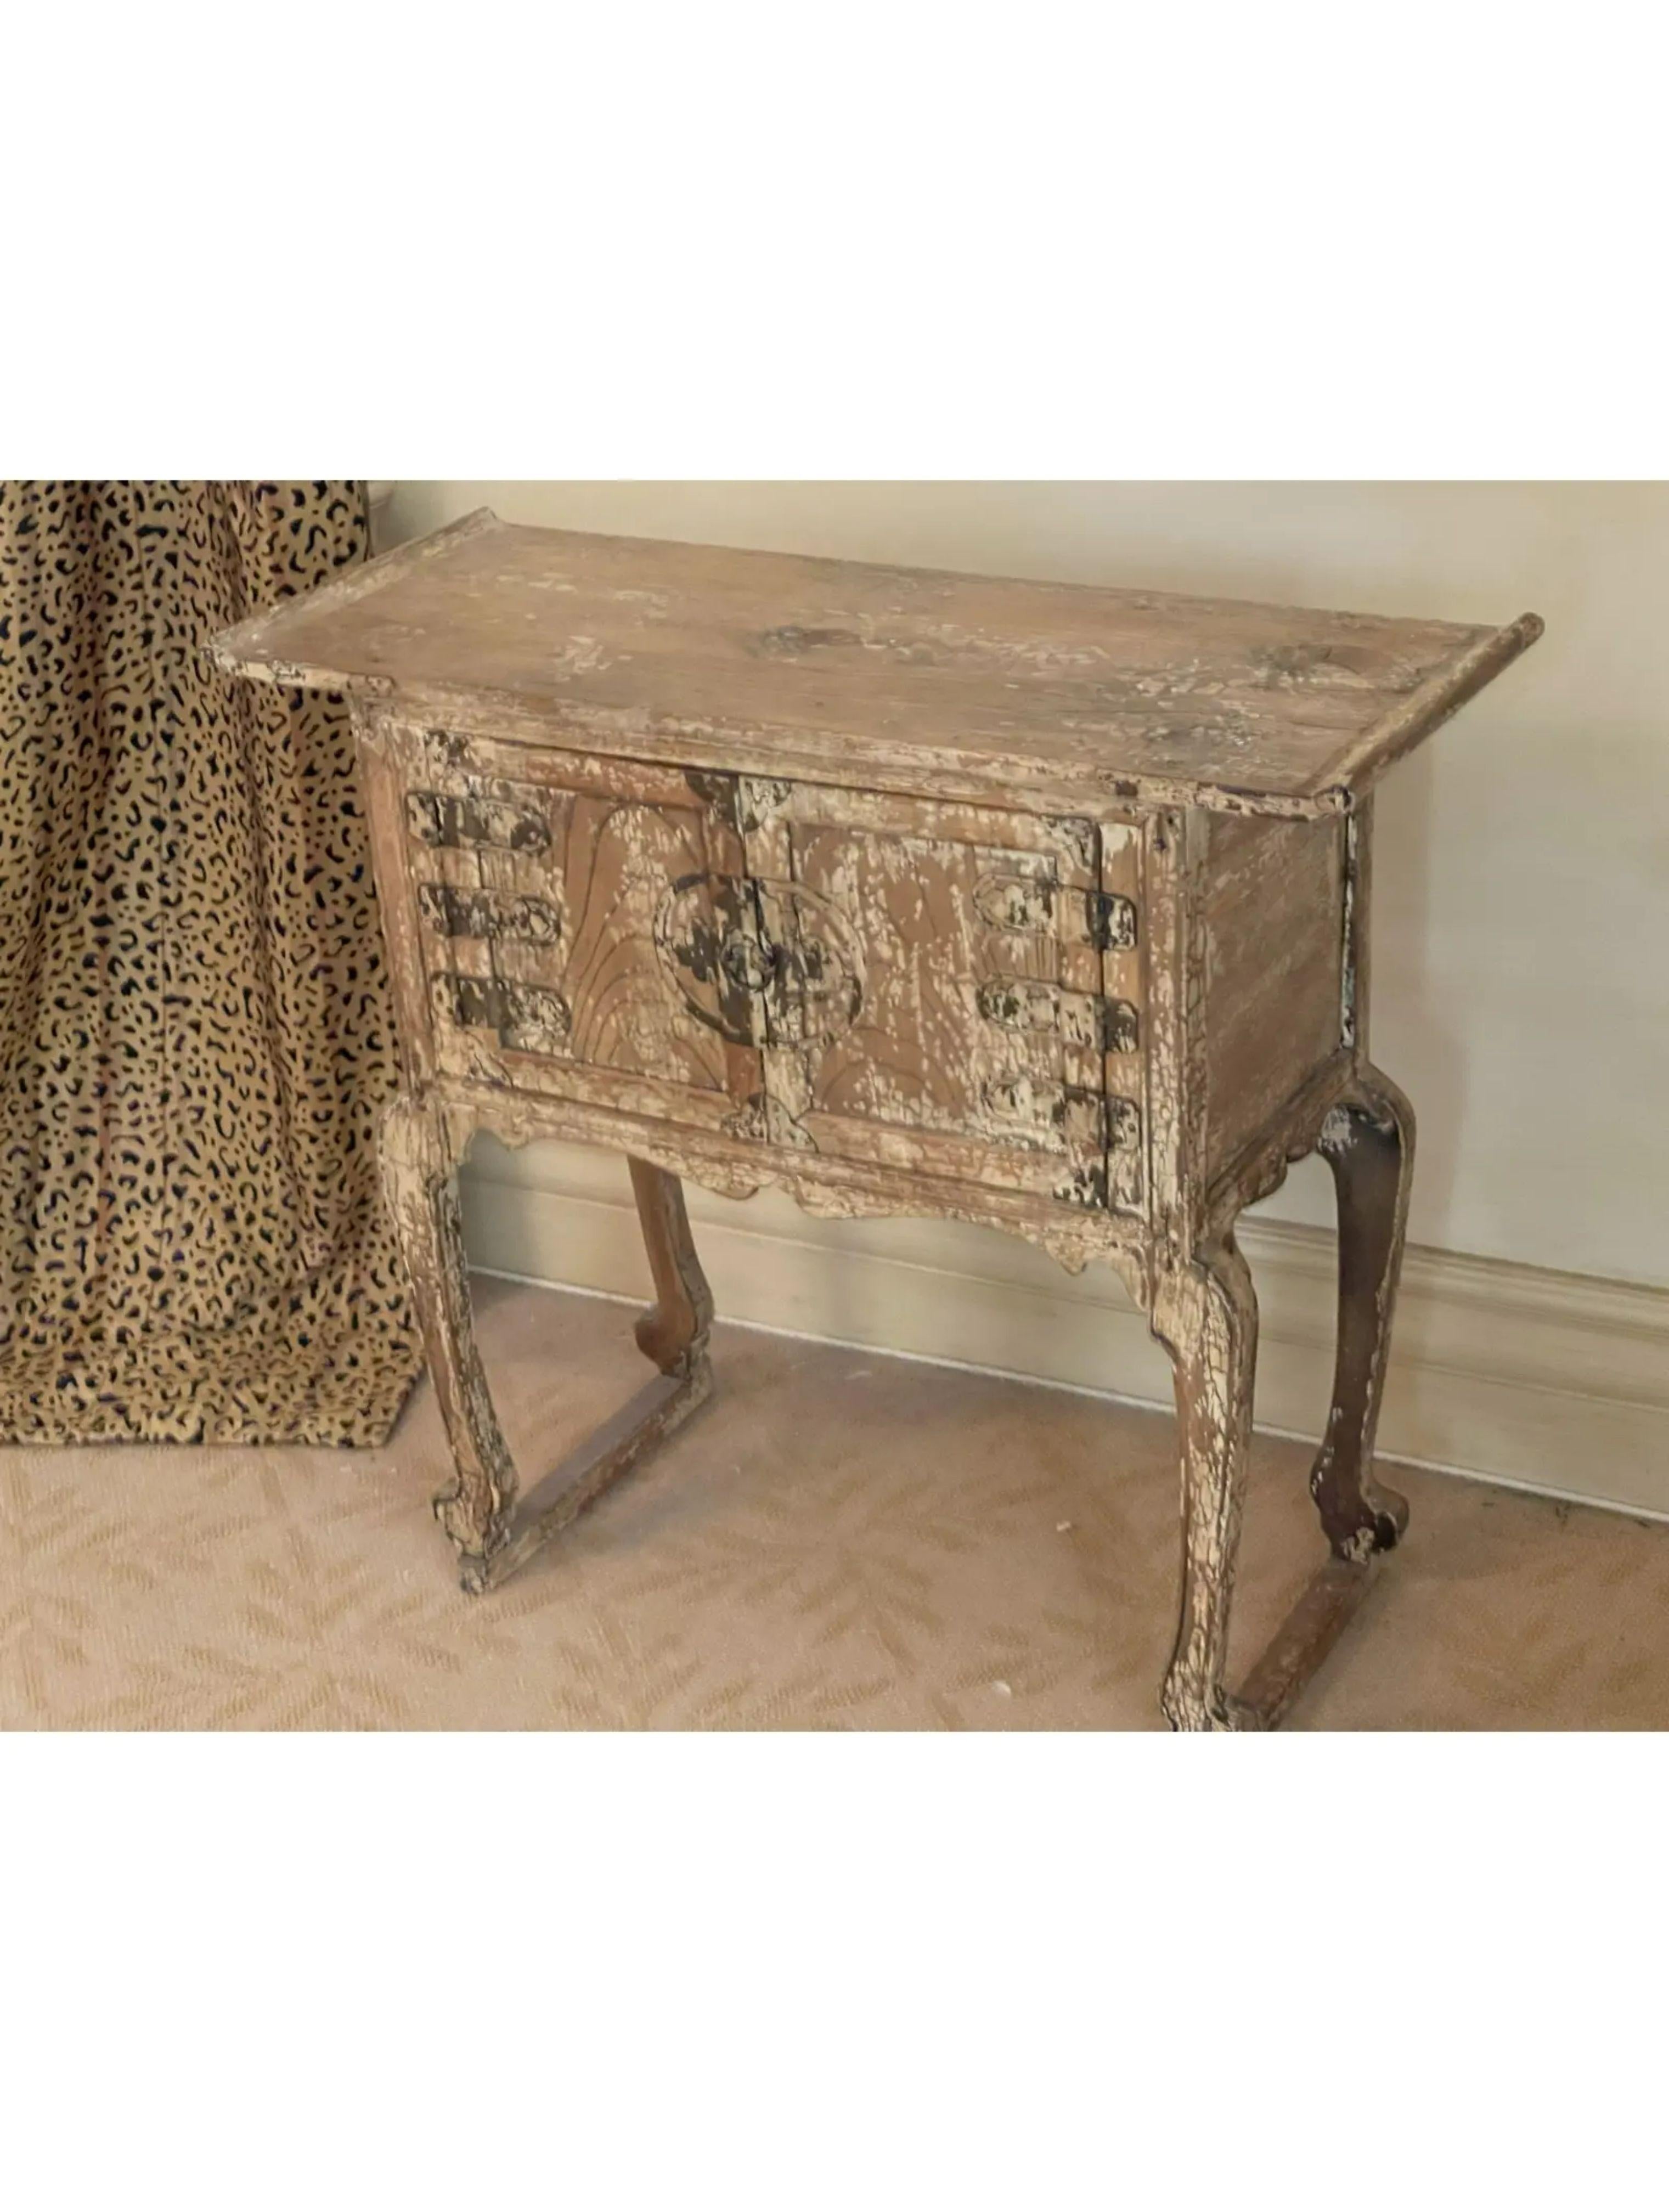 20th Century Antique Chinese Ming Style Side Table with Crackle Finish